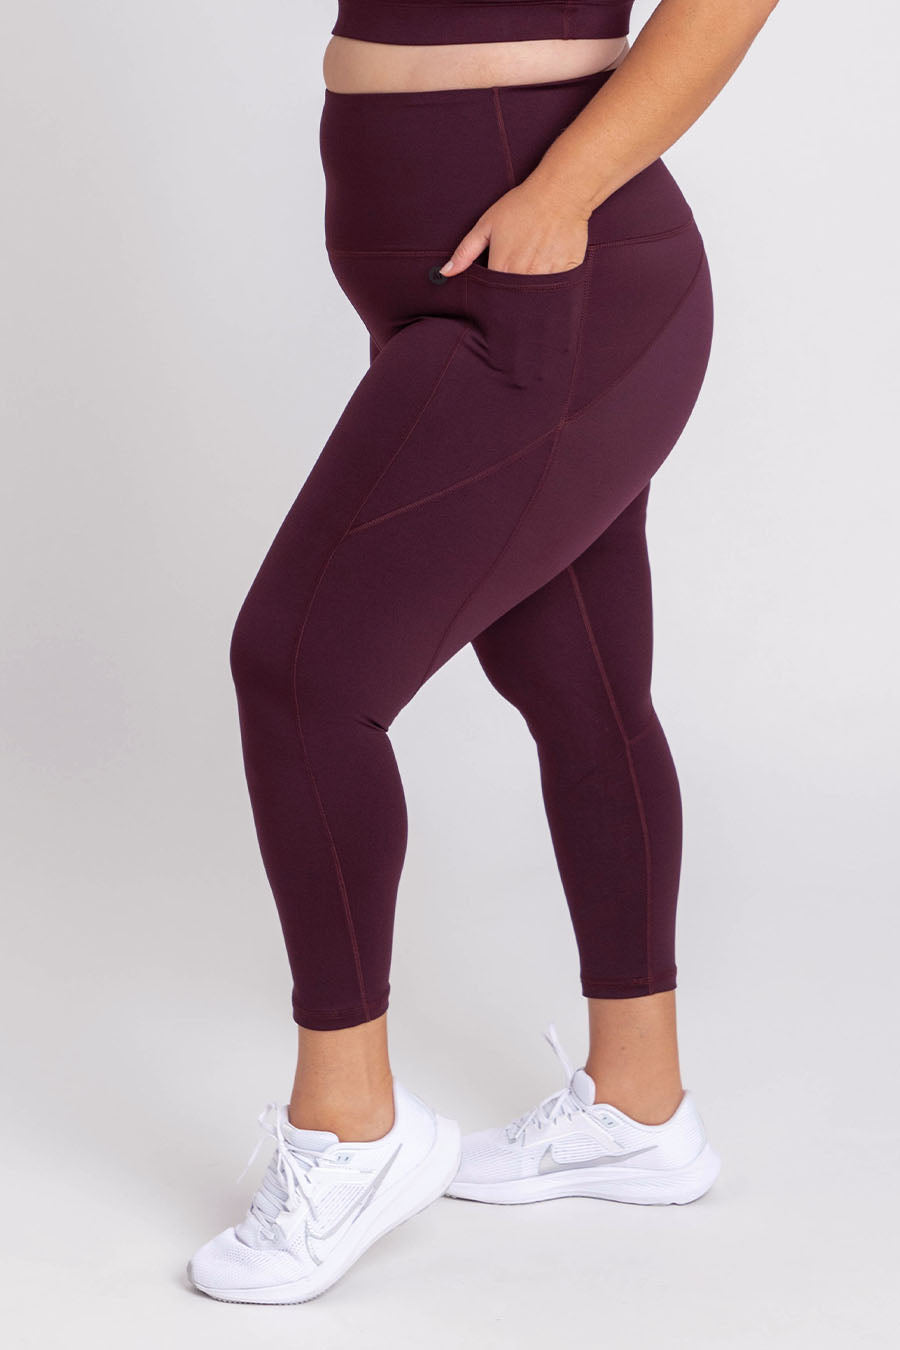 High Waist, Stretchy and Recovery Sports Leggings Burgundy Shop